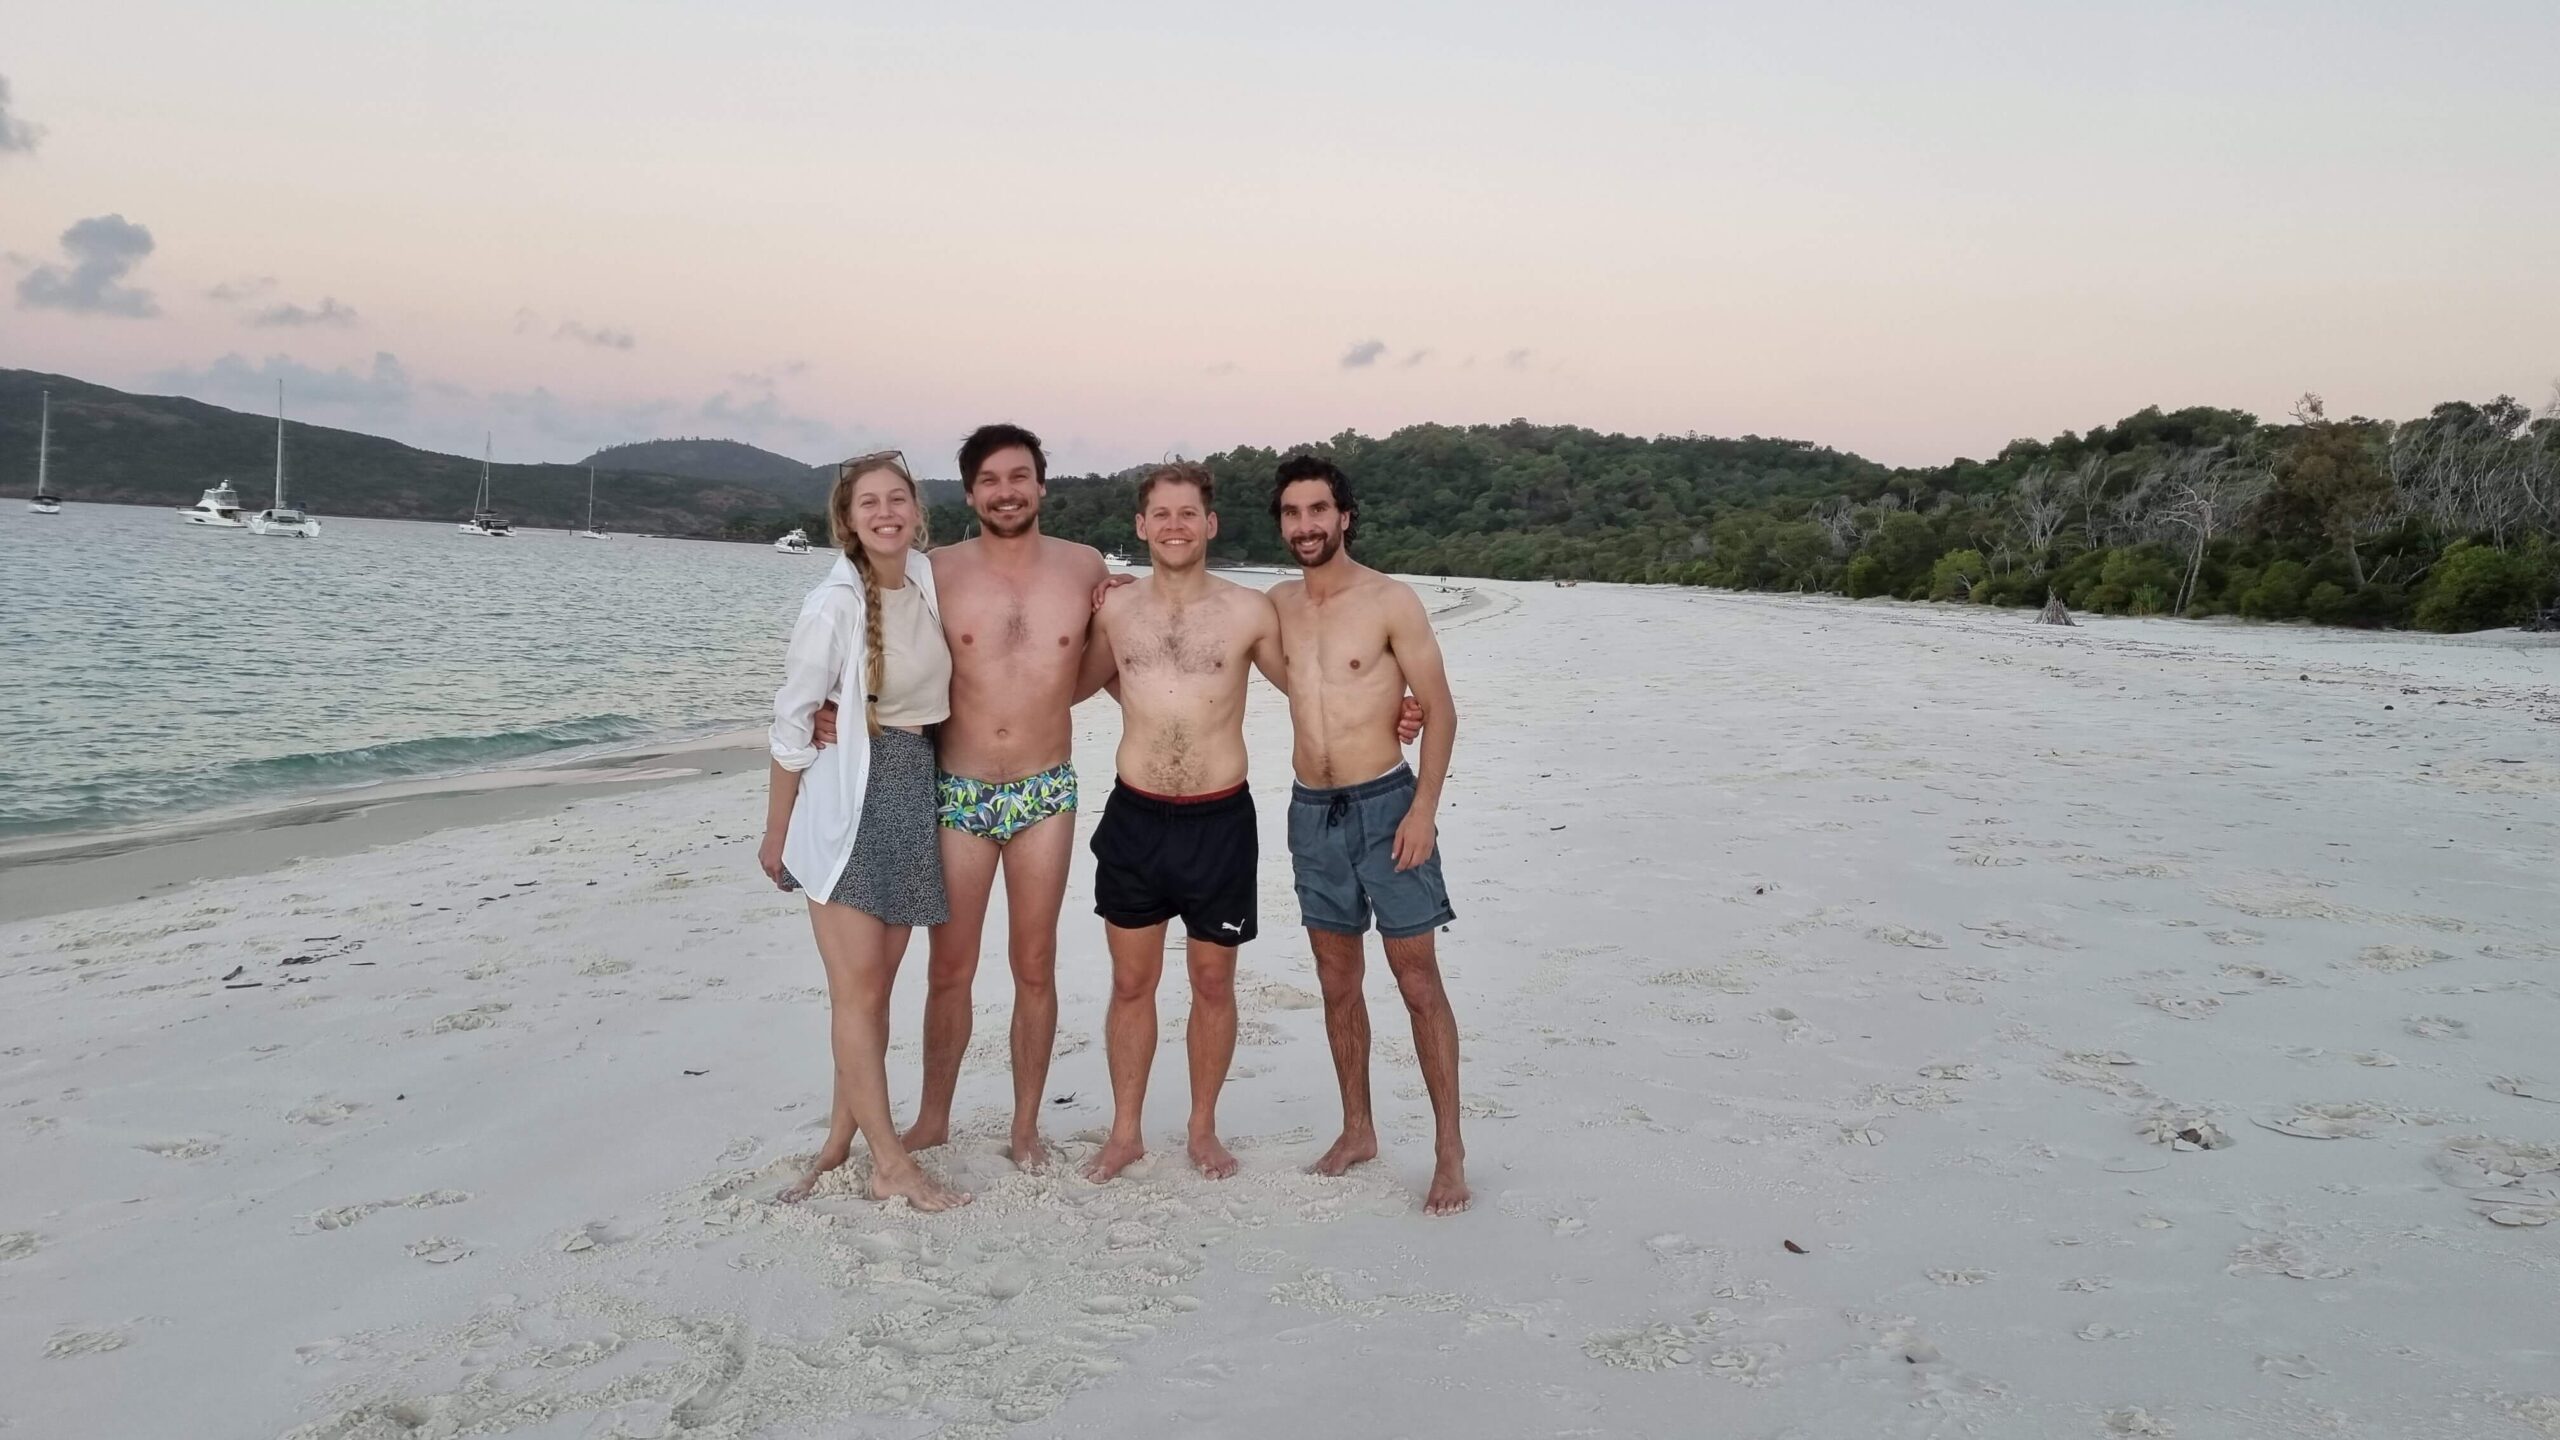 Me, Nick, Toby and Jacques at Whitehaven Beach, the Whitsundays. Photo taken by Lizzie.